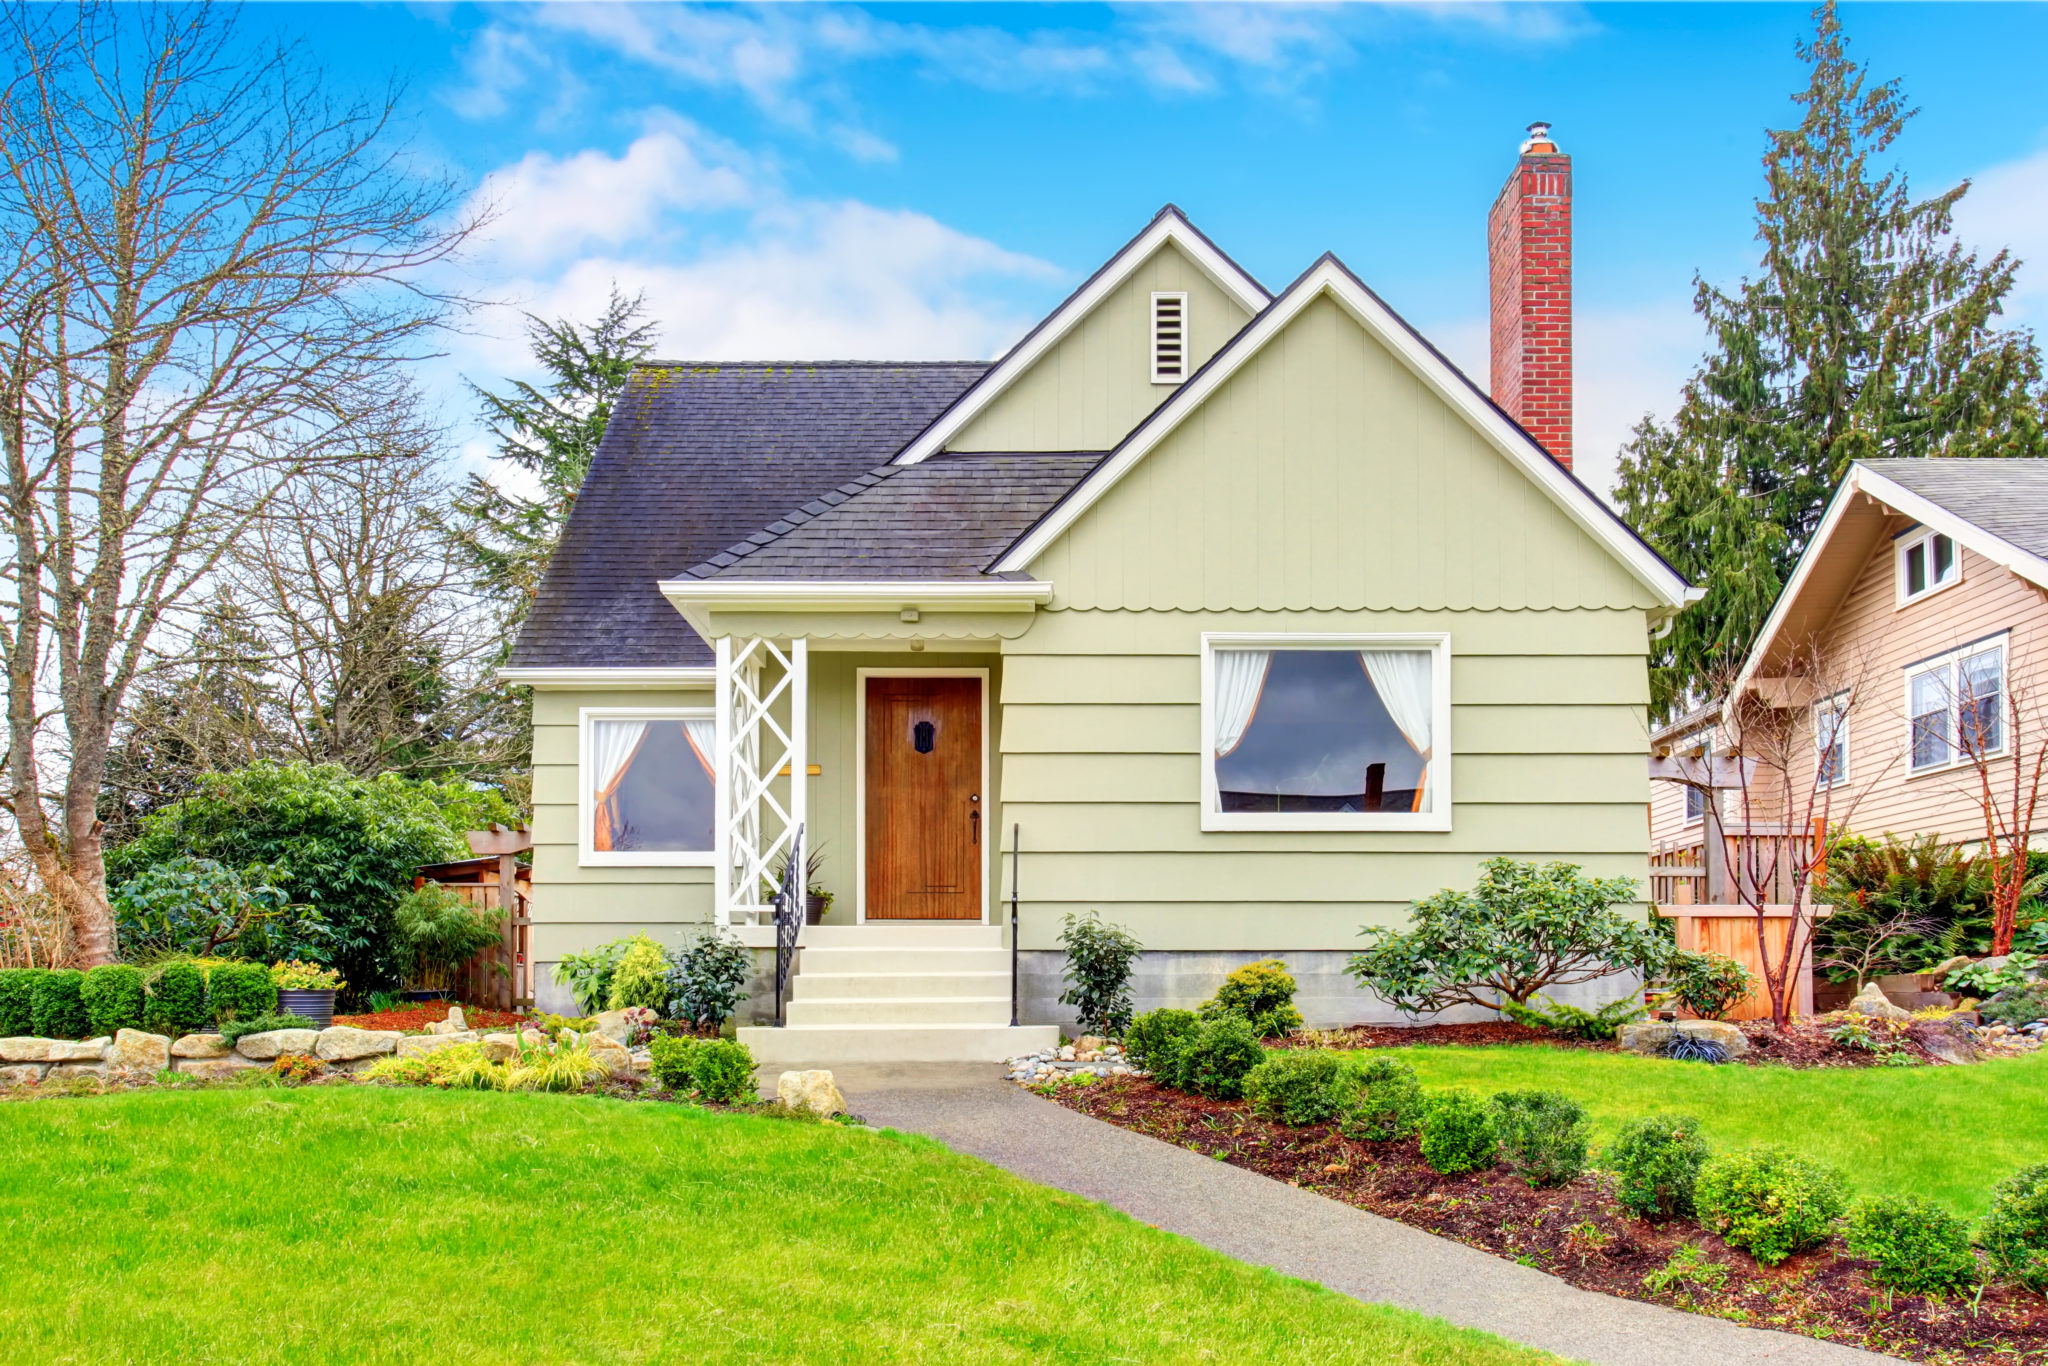 You Can Improve Your Home’s Curb Appeal in Just One Weekend! Small American house with well kept lawn and nice landscaping desing around. Northwest, USA